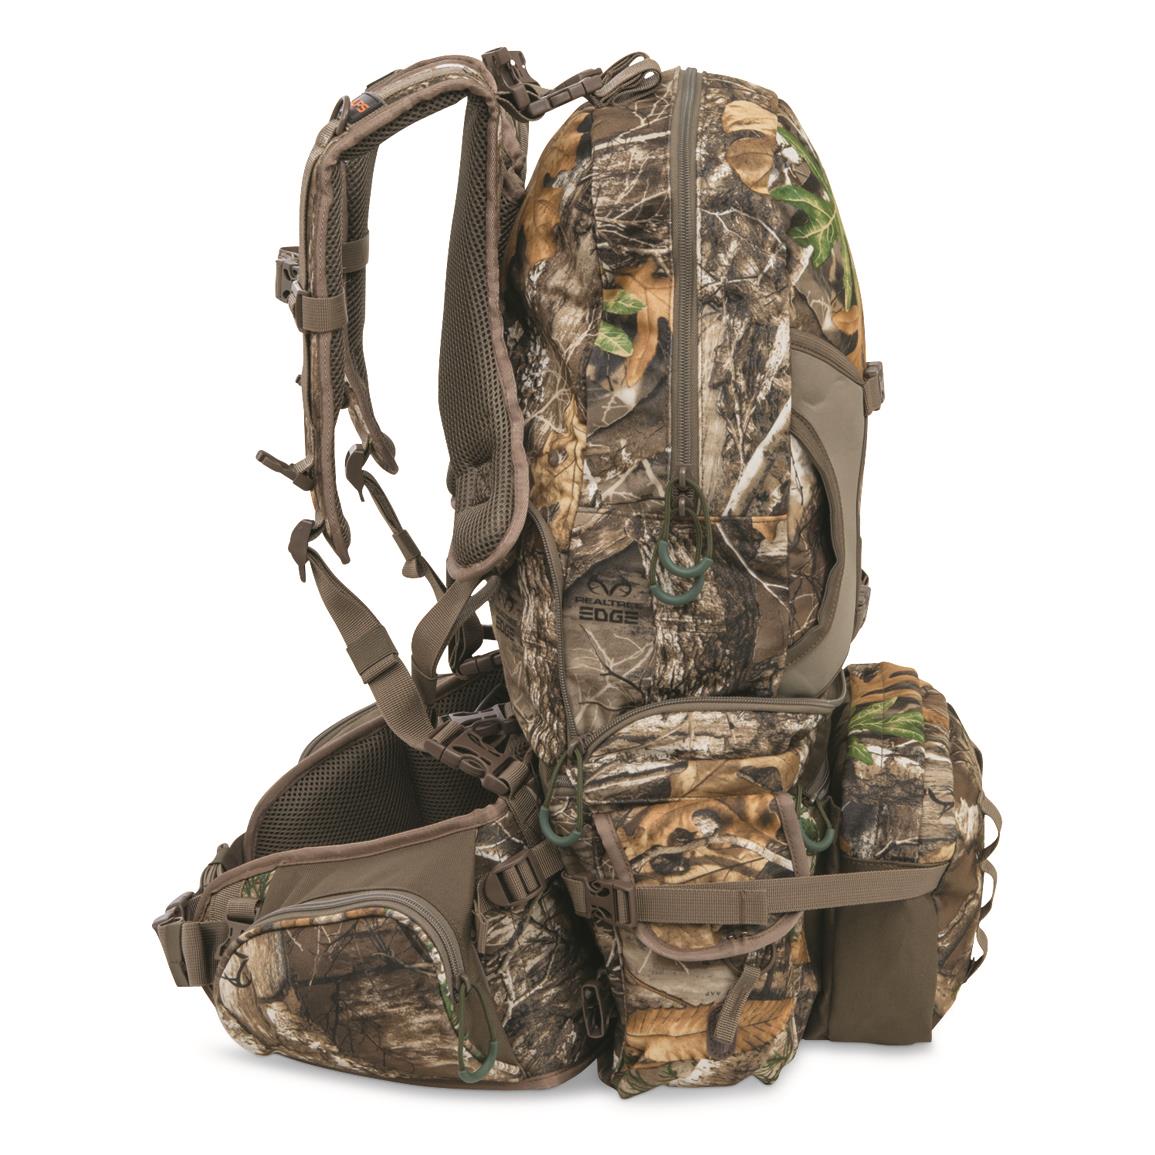 ALPS OutdoorZ Pathfinder Hunting Pack - 668533, Hunting Backpacks at ...